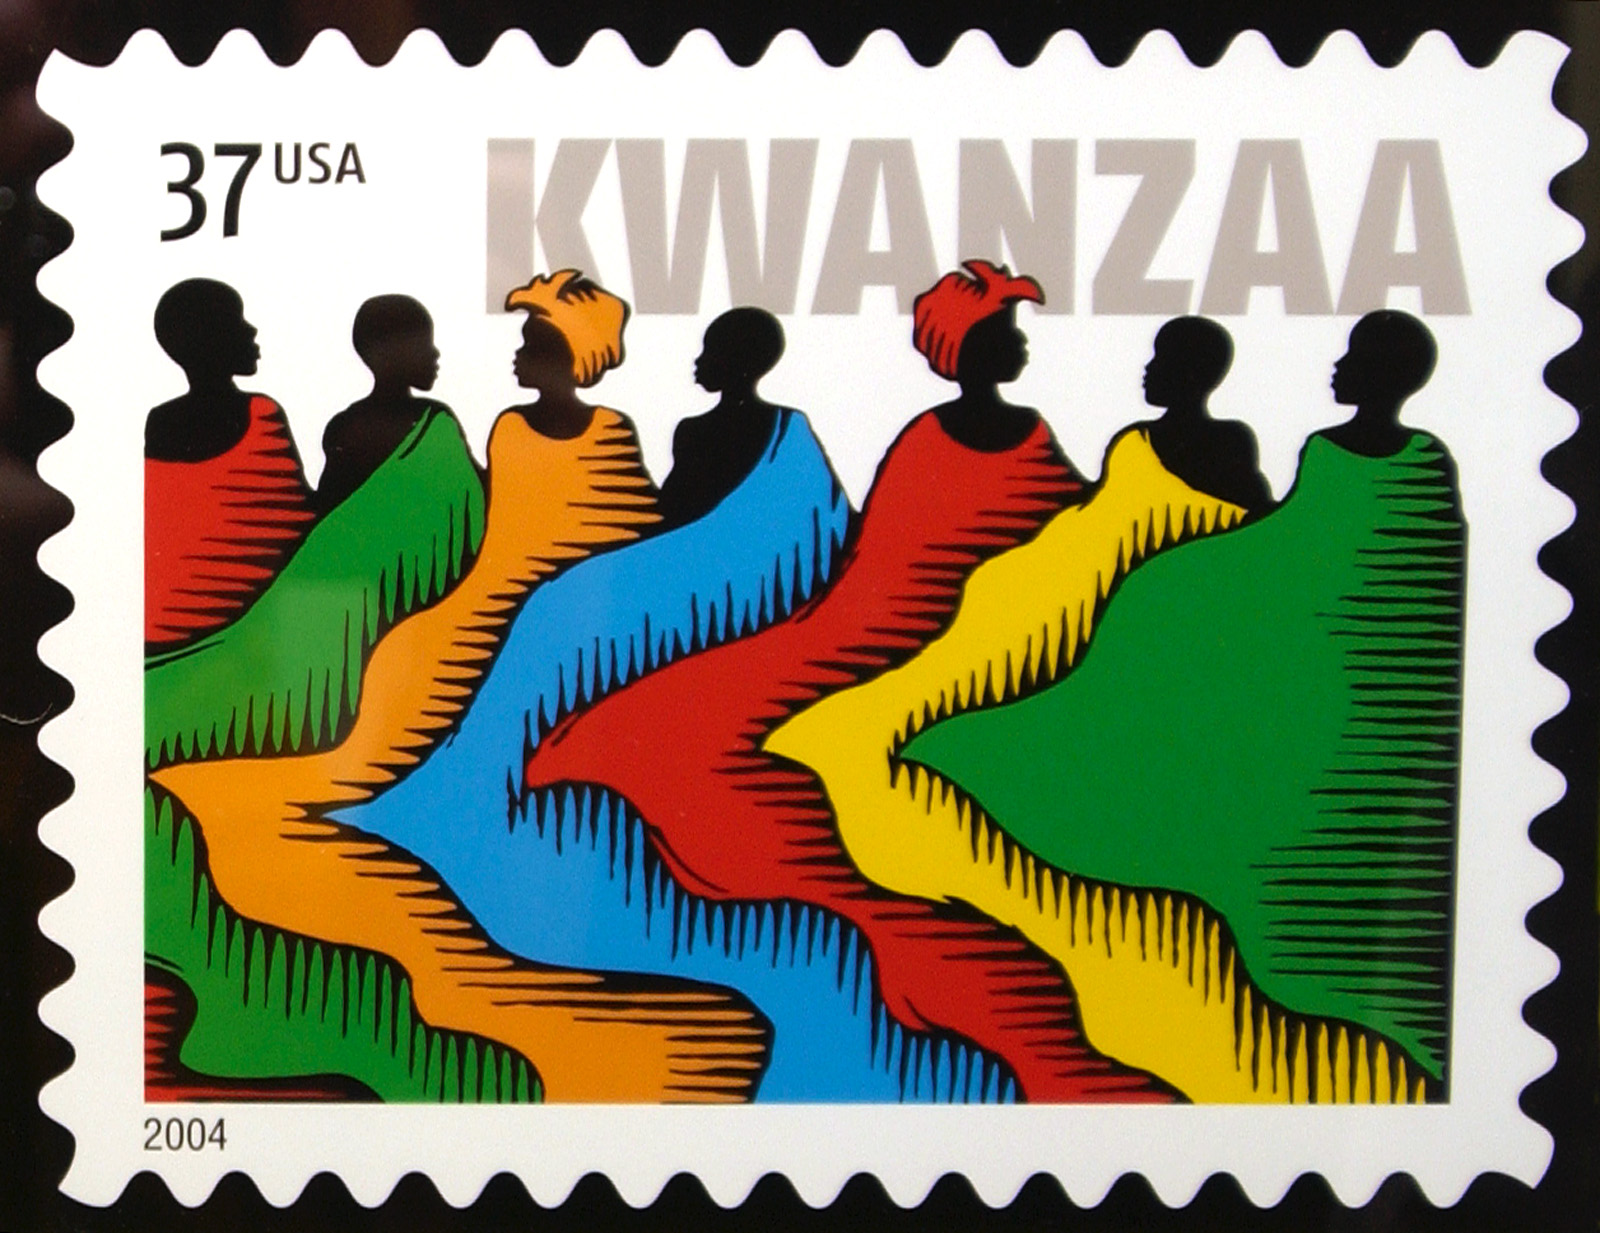 This new Kwanzaa stamp was designed and created by Daniel Minter of Portland.